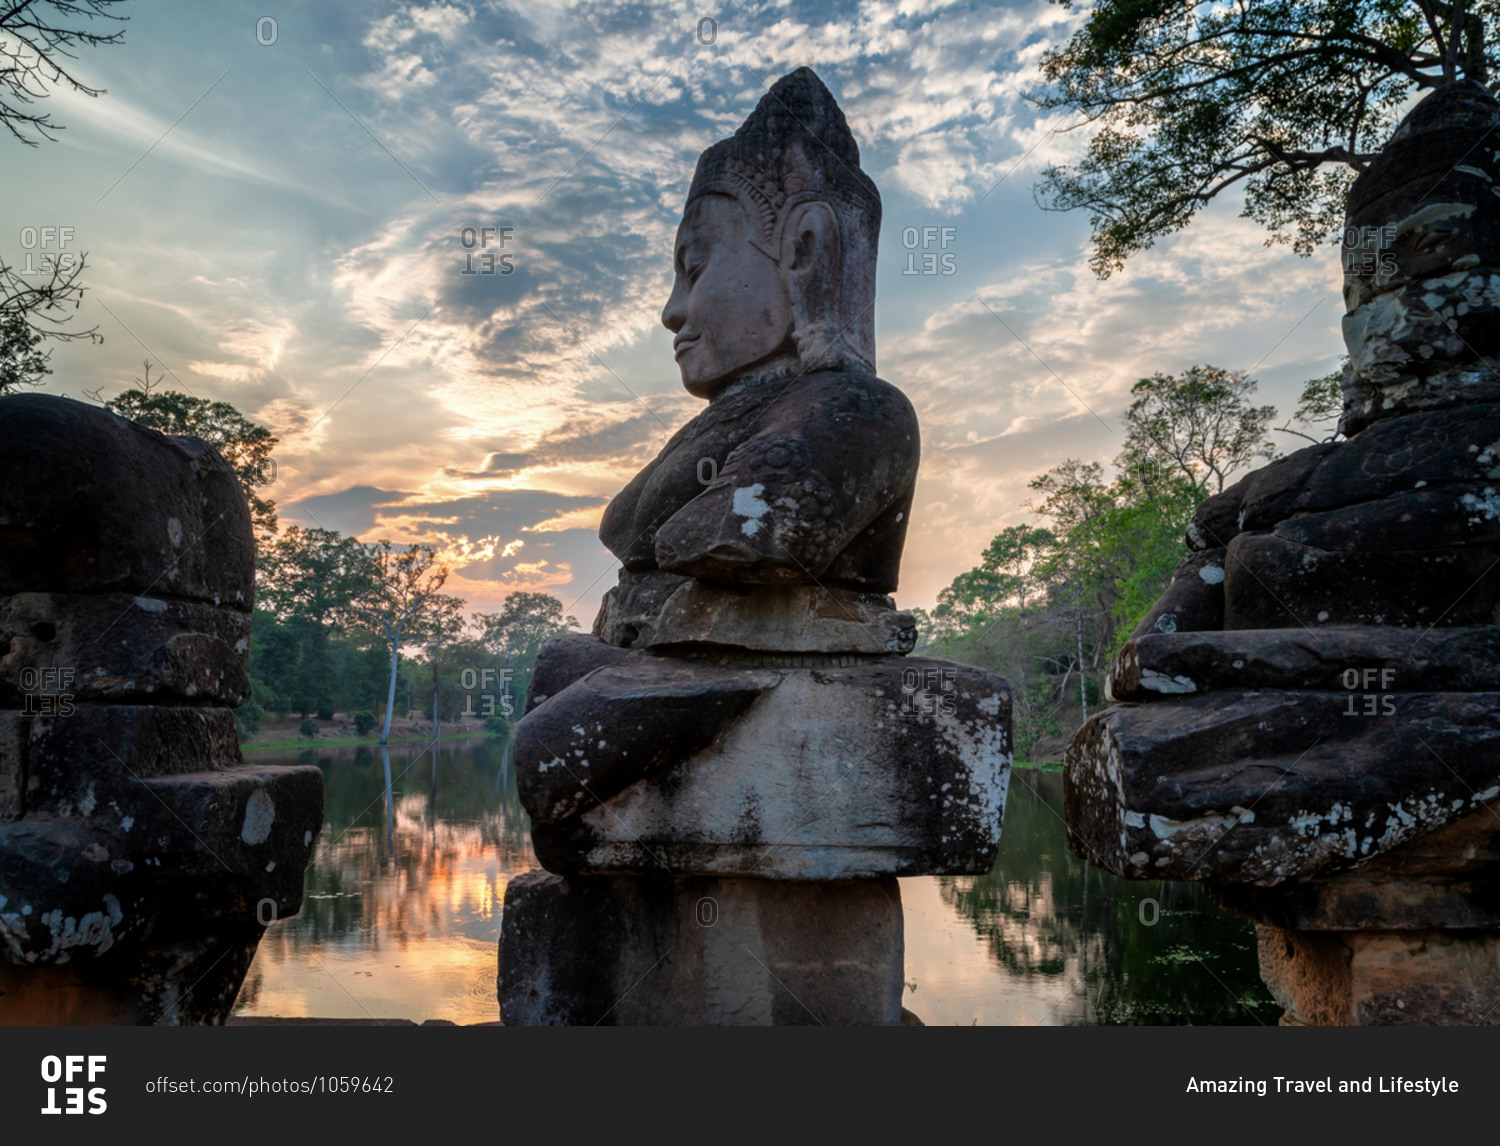 Angkor Archaeological Park, Siem Reap, Cambodia. South gate of Angkor Thom.  Good gods in hindu epic tale of a tug of war between good vs evil in the story the churning of the sea of milk.